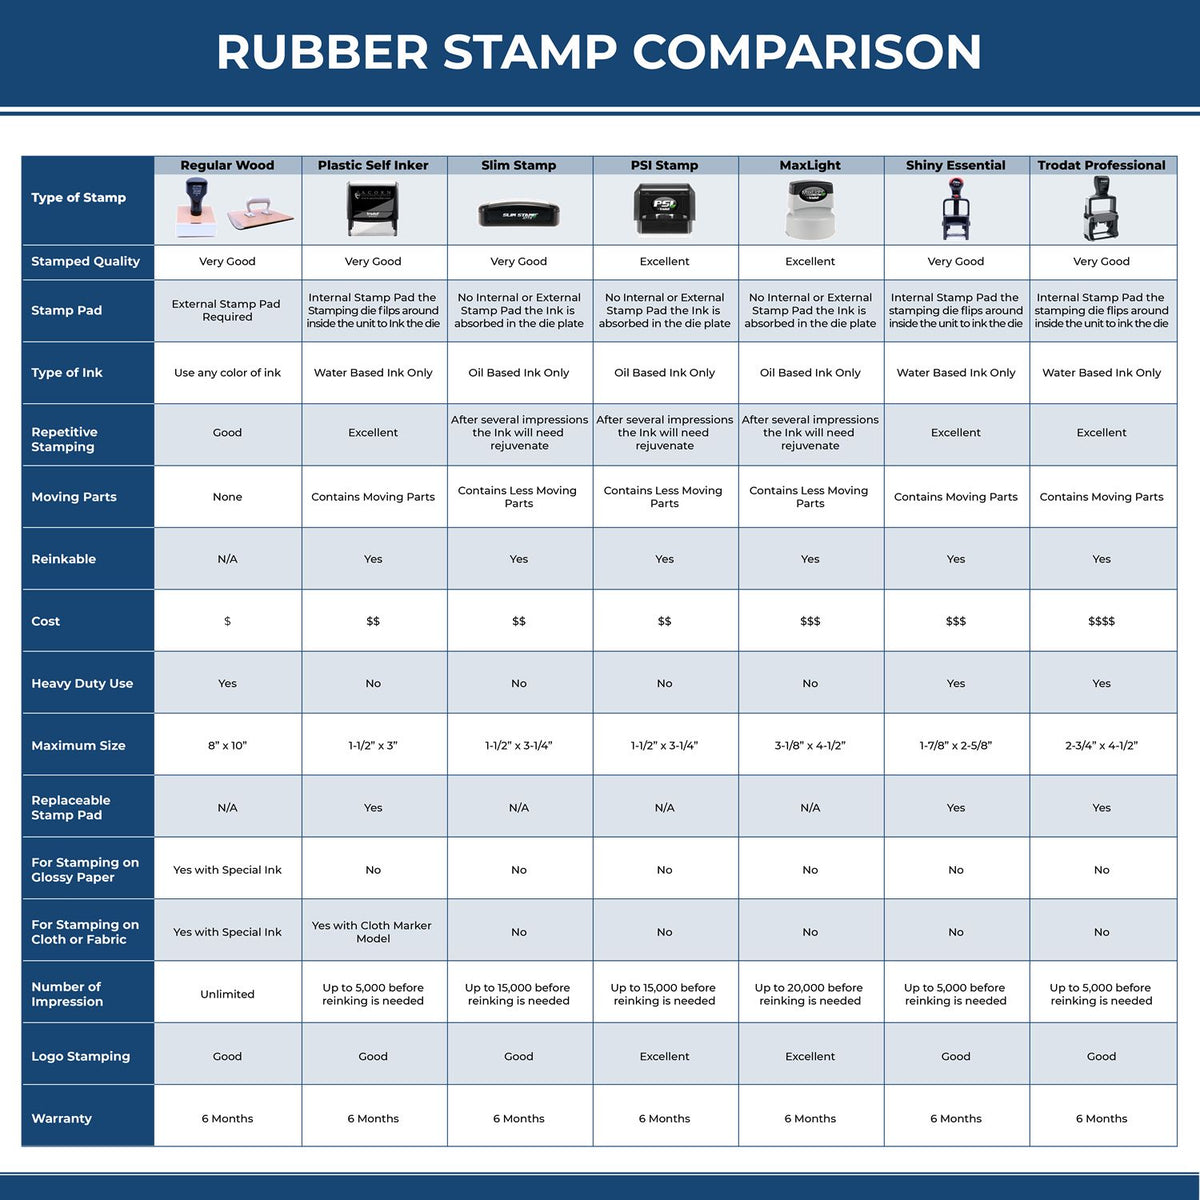 A comparison chart for the different types of mount models available for the MaxLight Premium Pre-Inked Florida Rectangular Notarial Stamp.